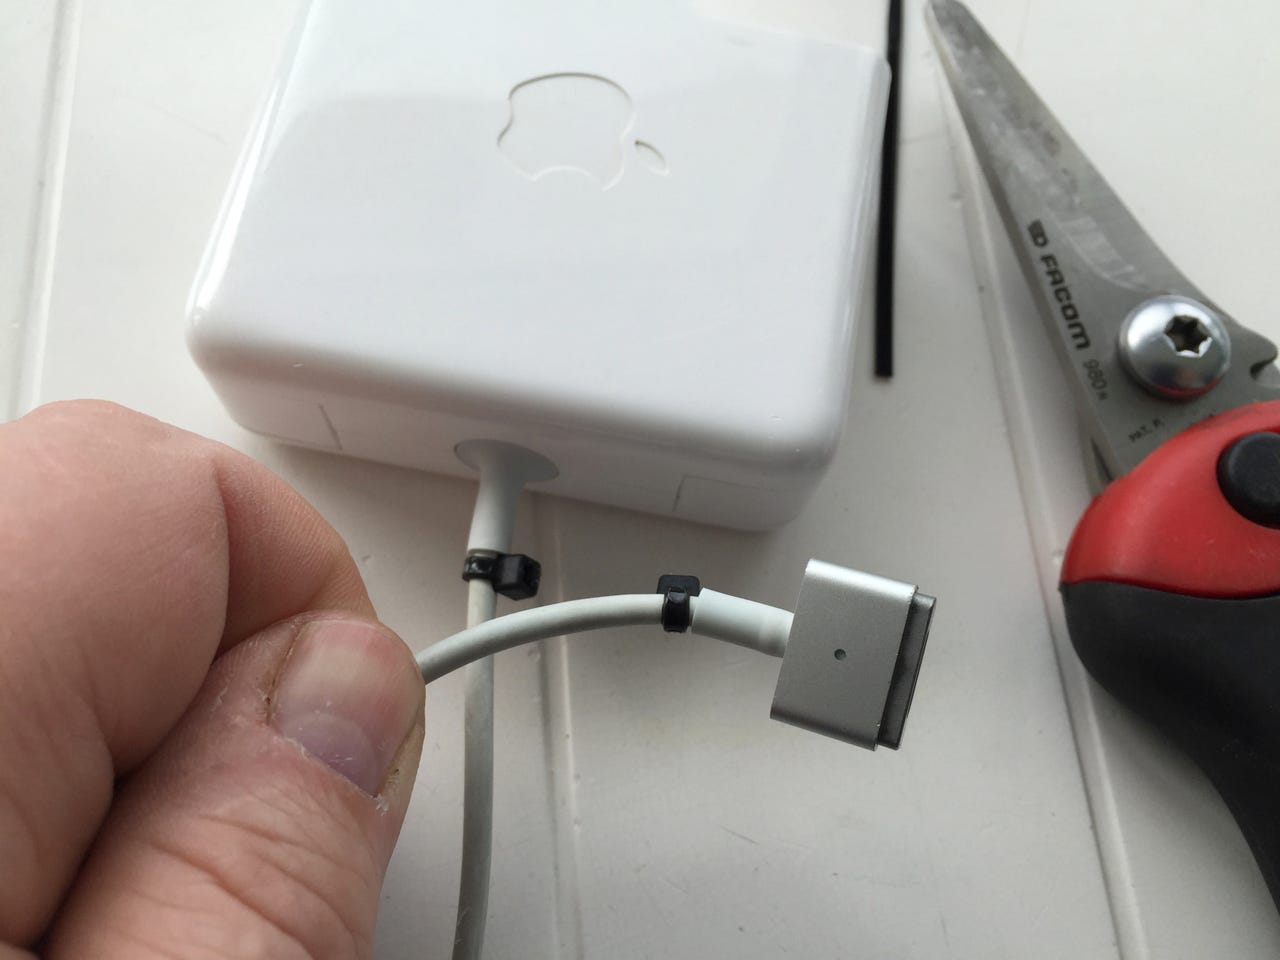 Here's how to prevent laptop power cords from fraying